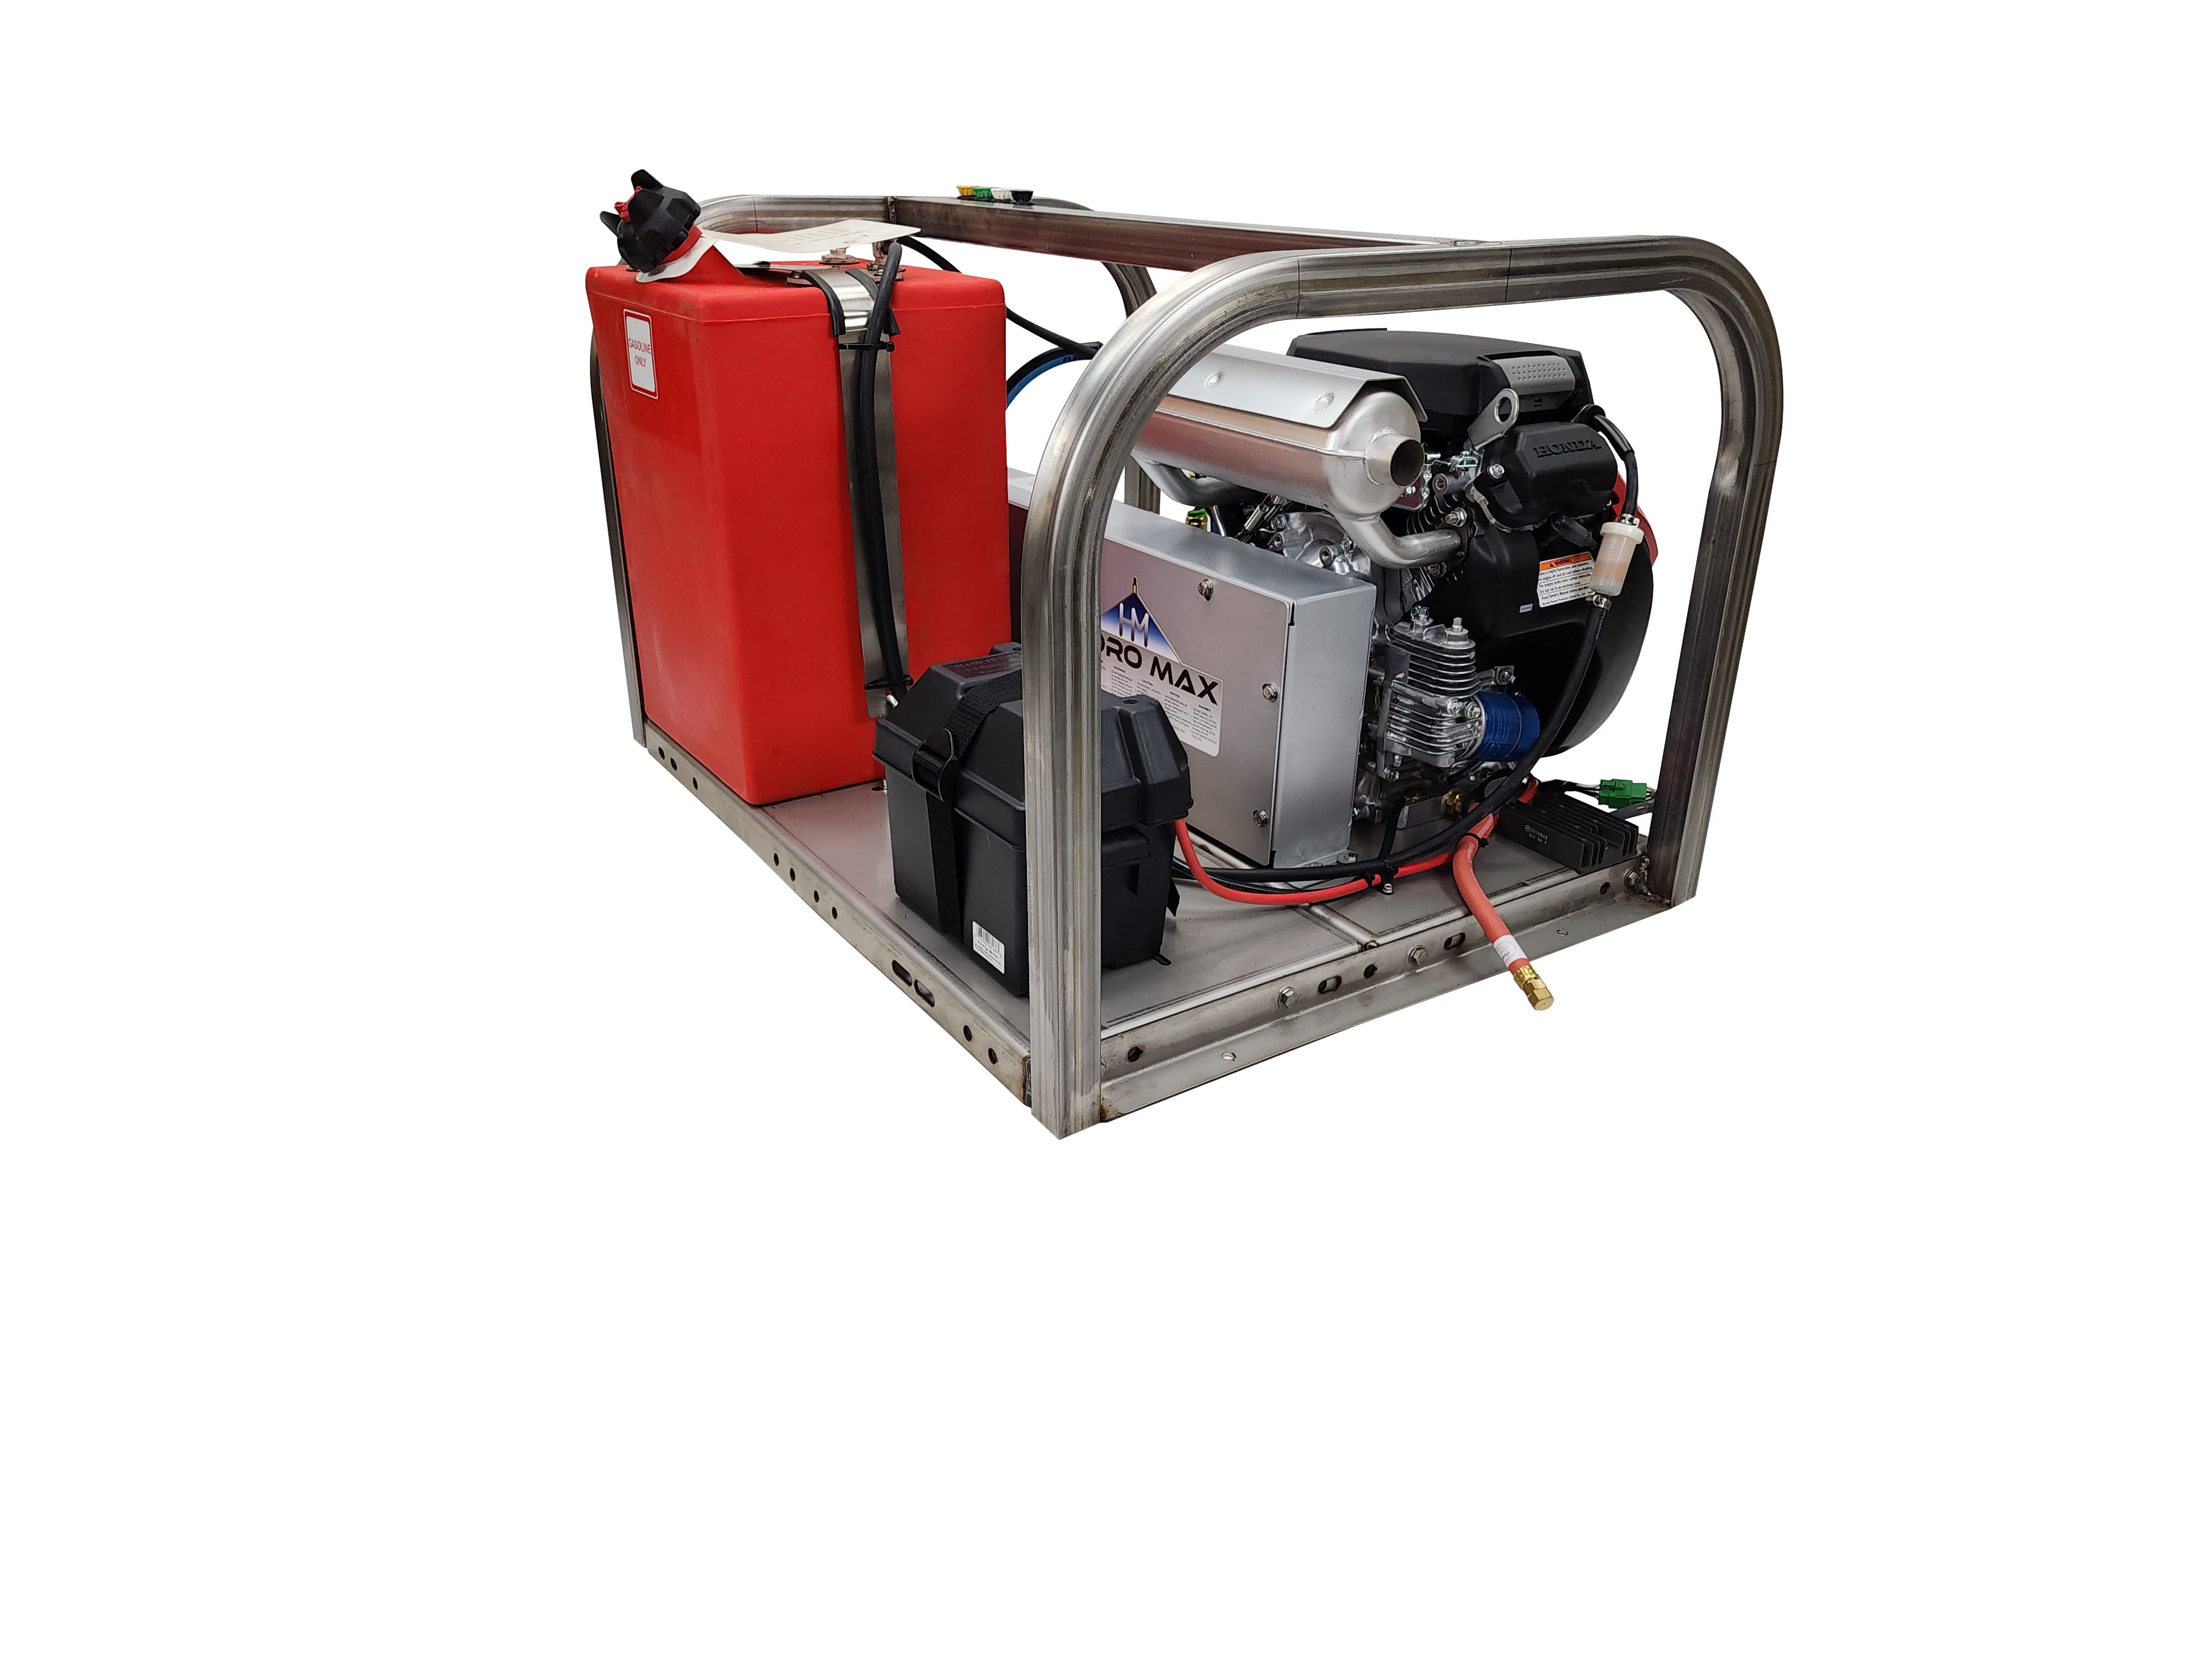 Hydro Max CW10030HG-10gpm@3000psi Business & Industrial Hydro Max 